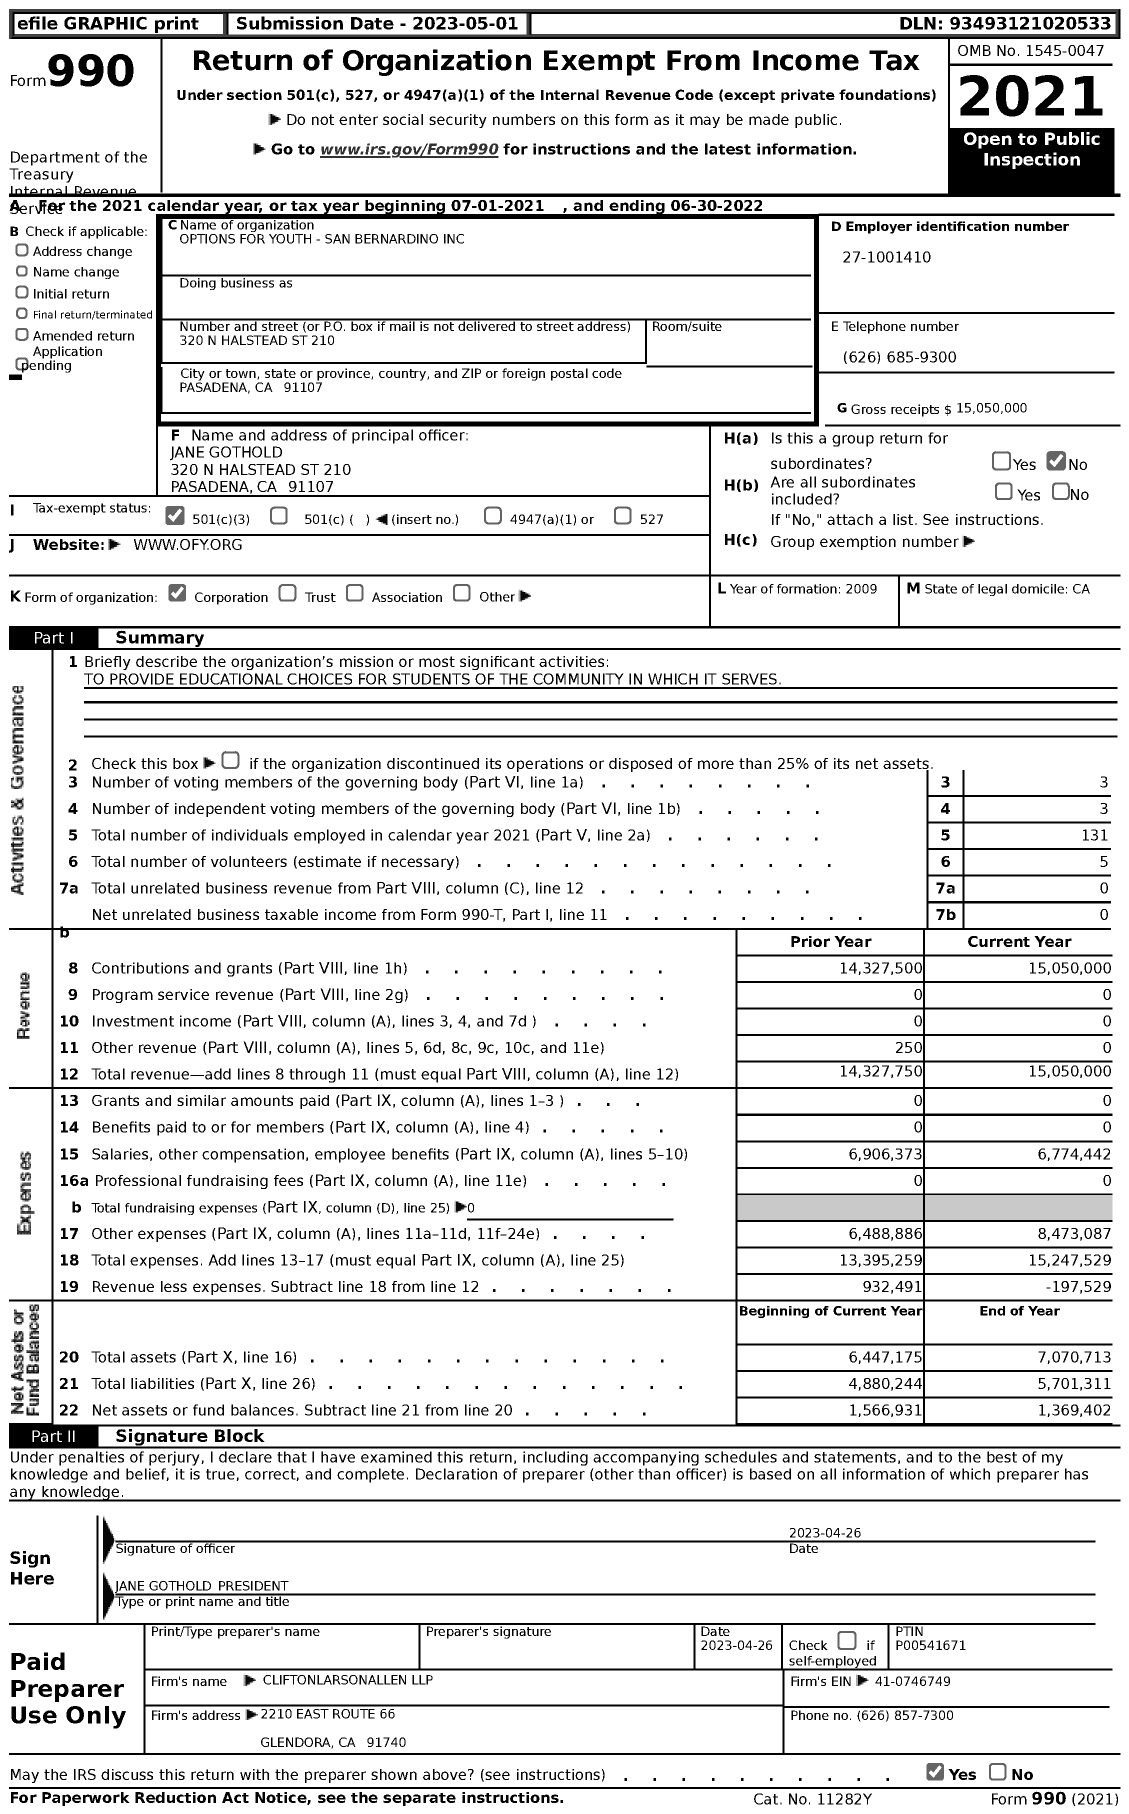 Image of first page of 2021 Form 990 for Options for Youth - San Bernardino (OFY)